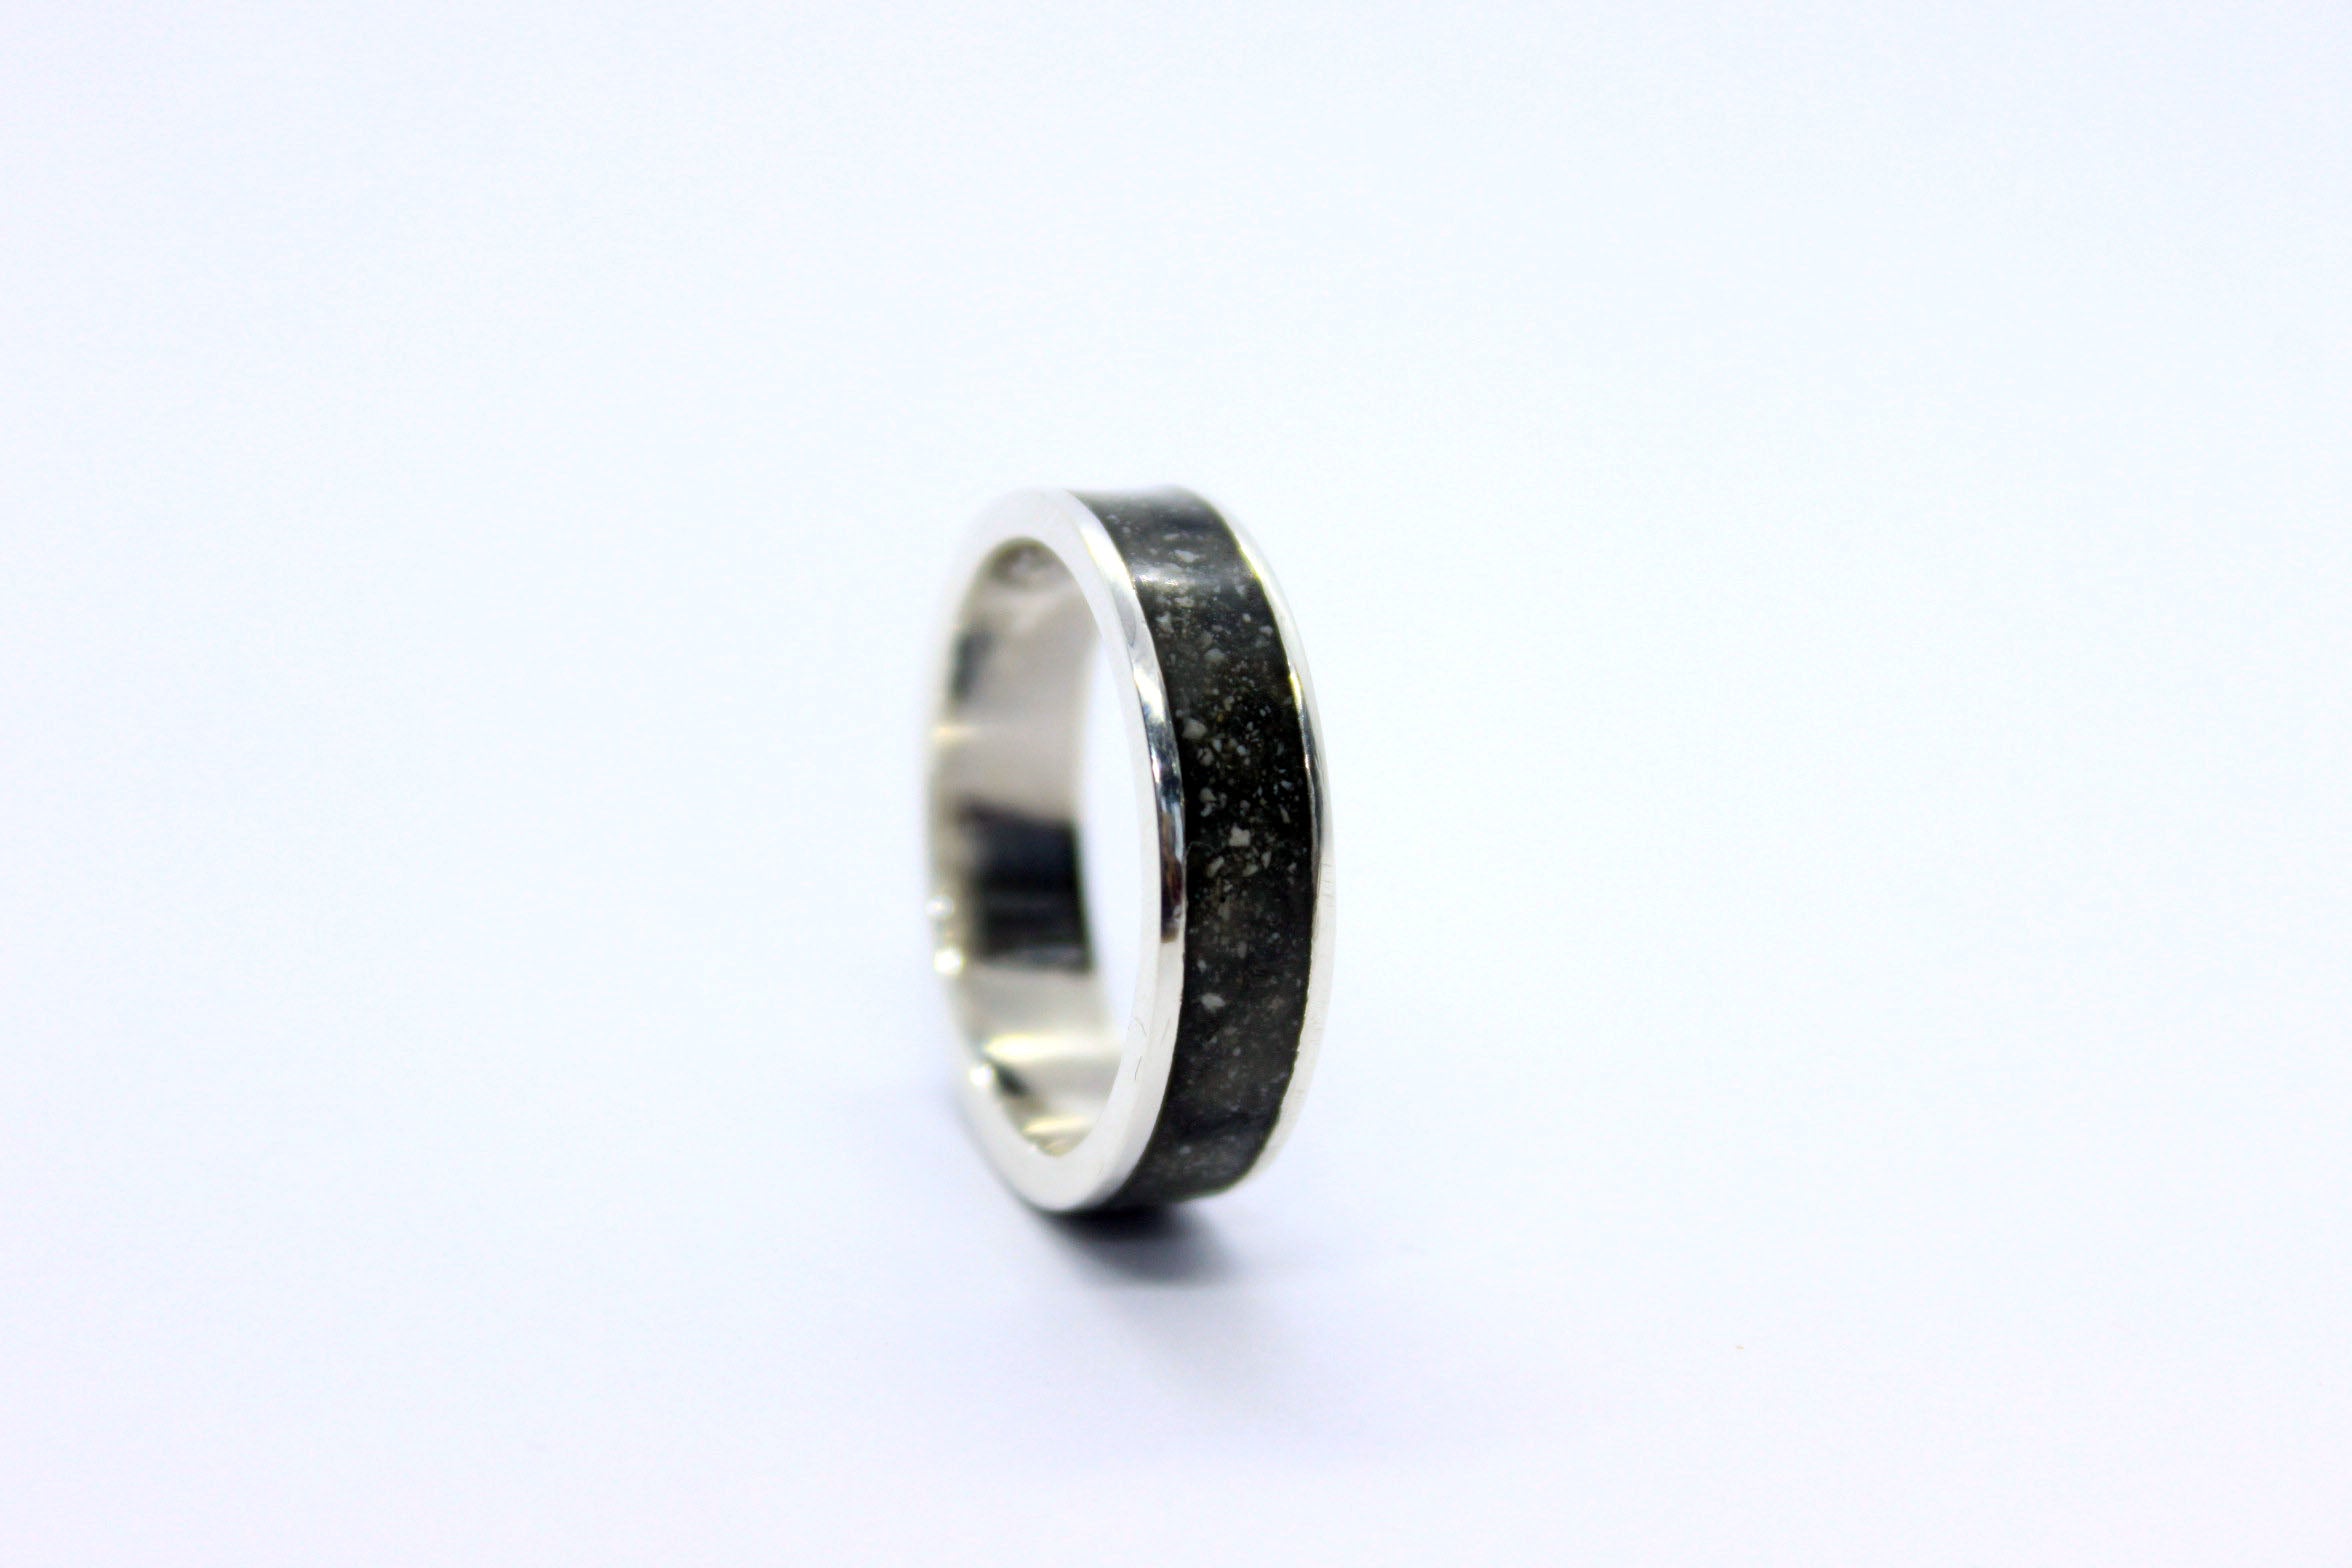 cremation jewelry, cremation ring, jewelry with ashes